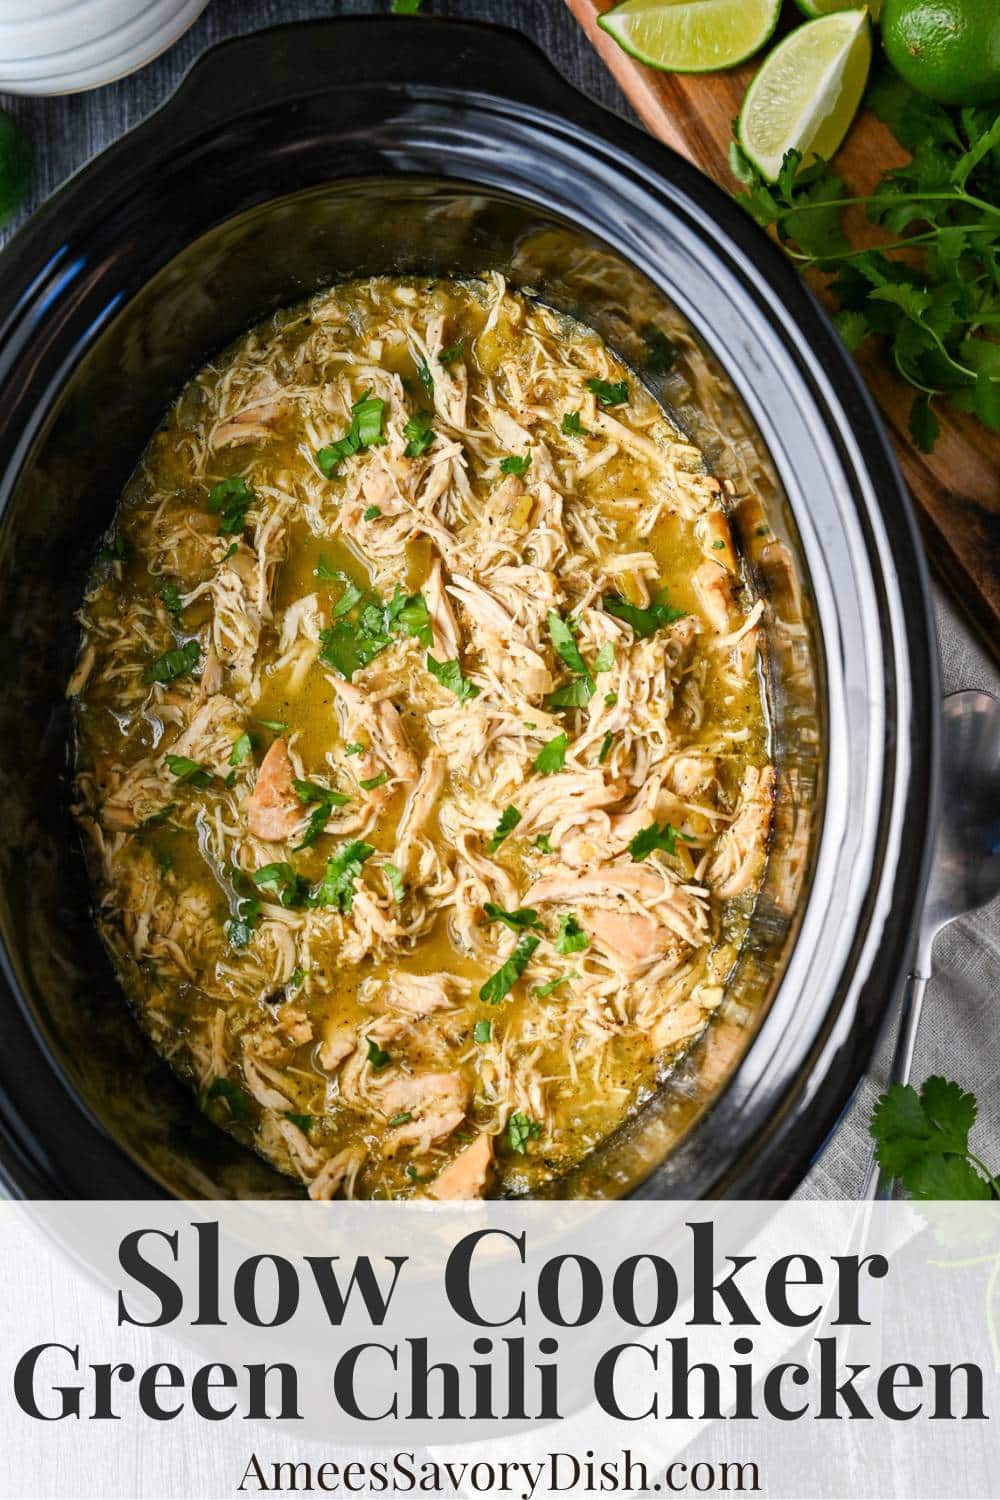 Packed with over 30 grams of protein per serving, this Slow Cooker Green Chili Chicken is perfect for healthy meal prep! via @Ameessavorydish